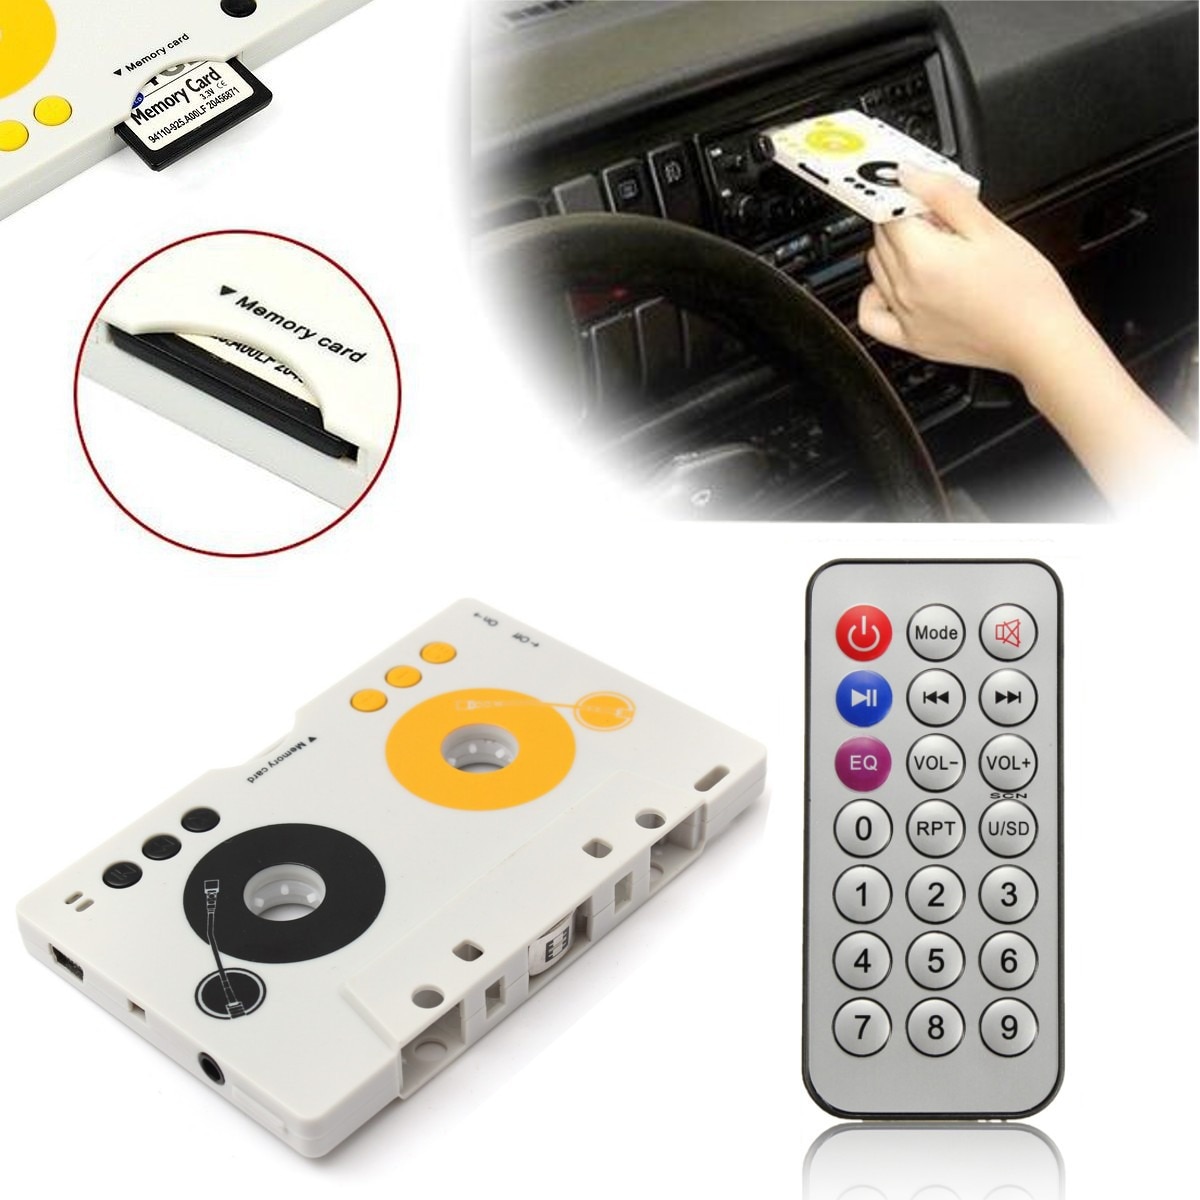 Portable Vintage Car Cassette SD MMC MP3 Tape Player Adapter Kit With Remote Control Instruction Stereo Audio Cassette Player